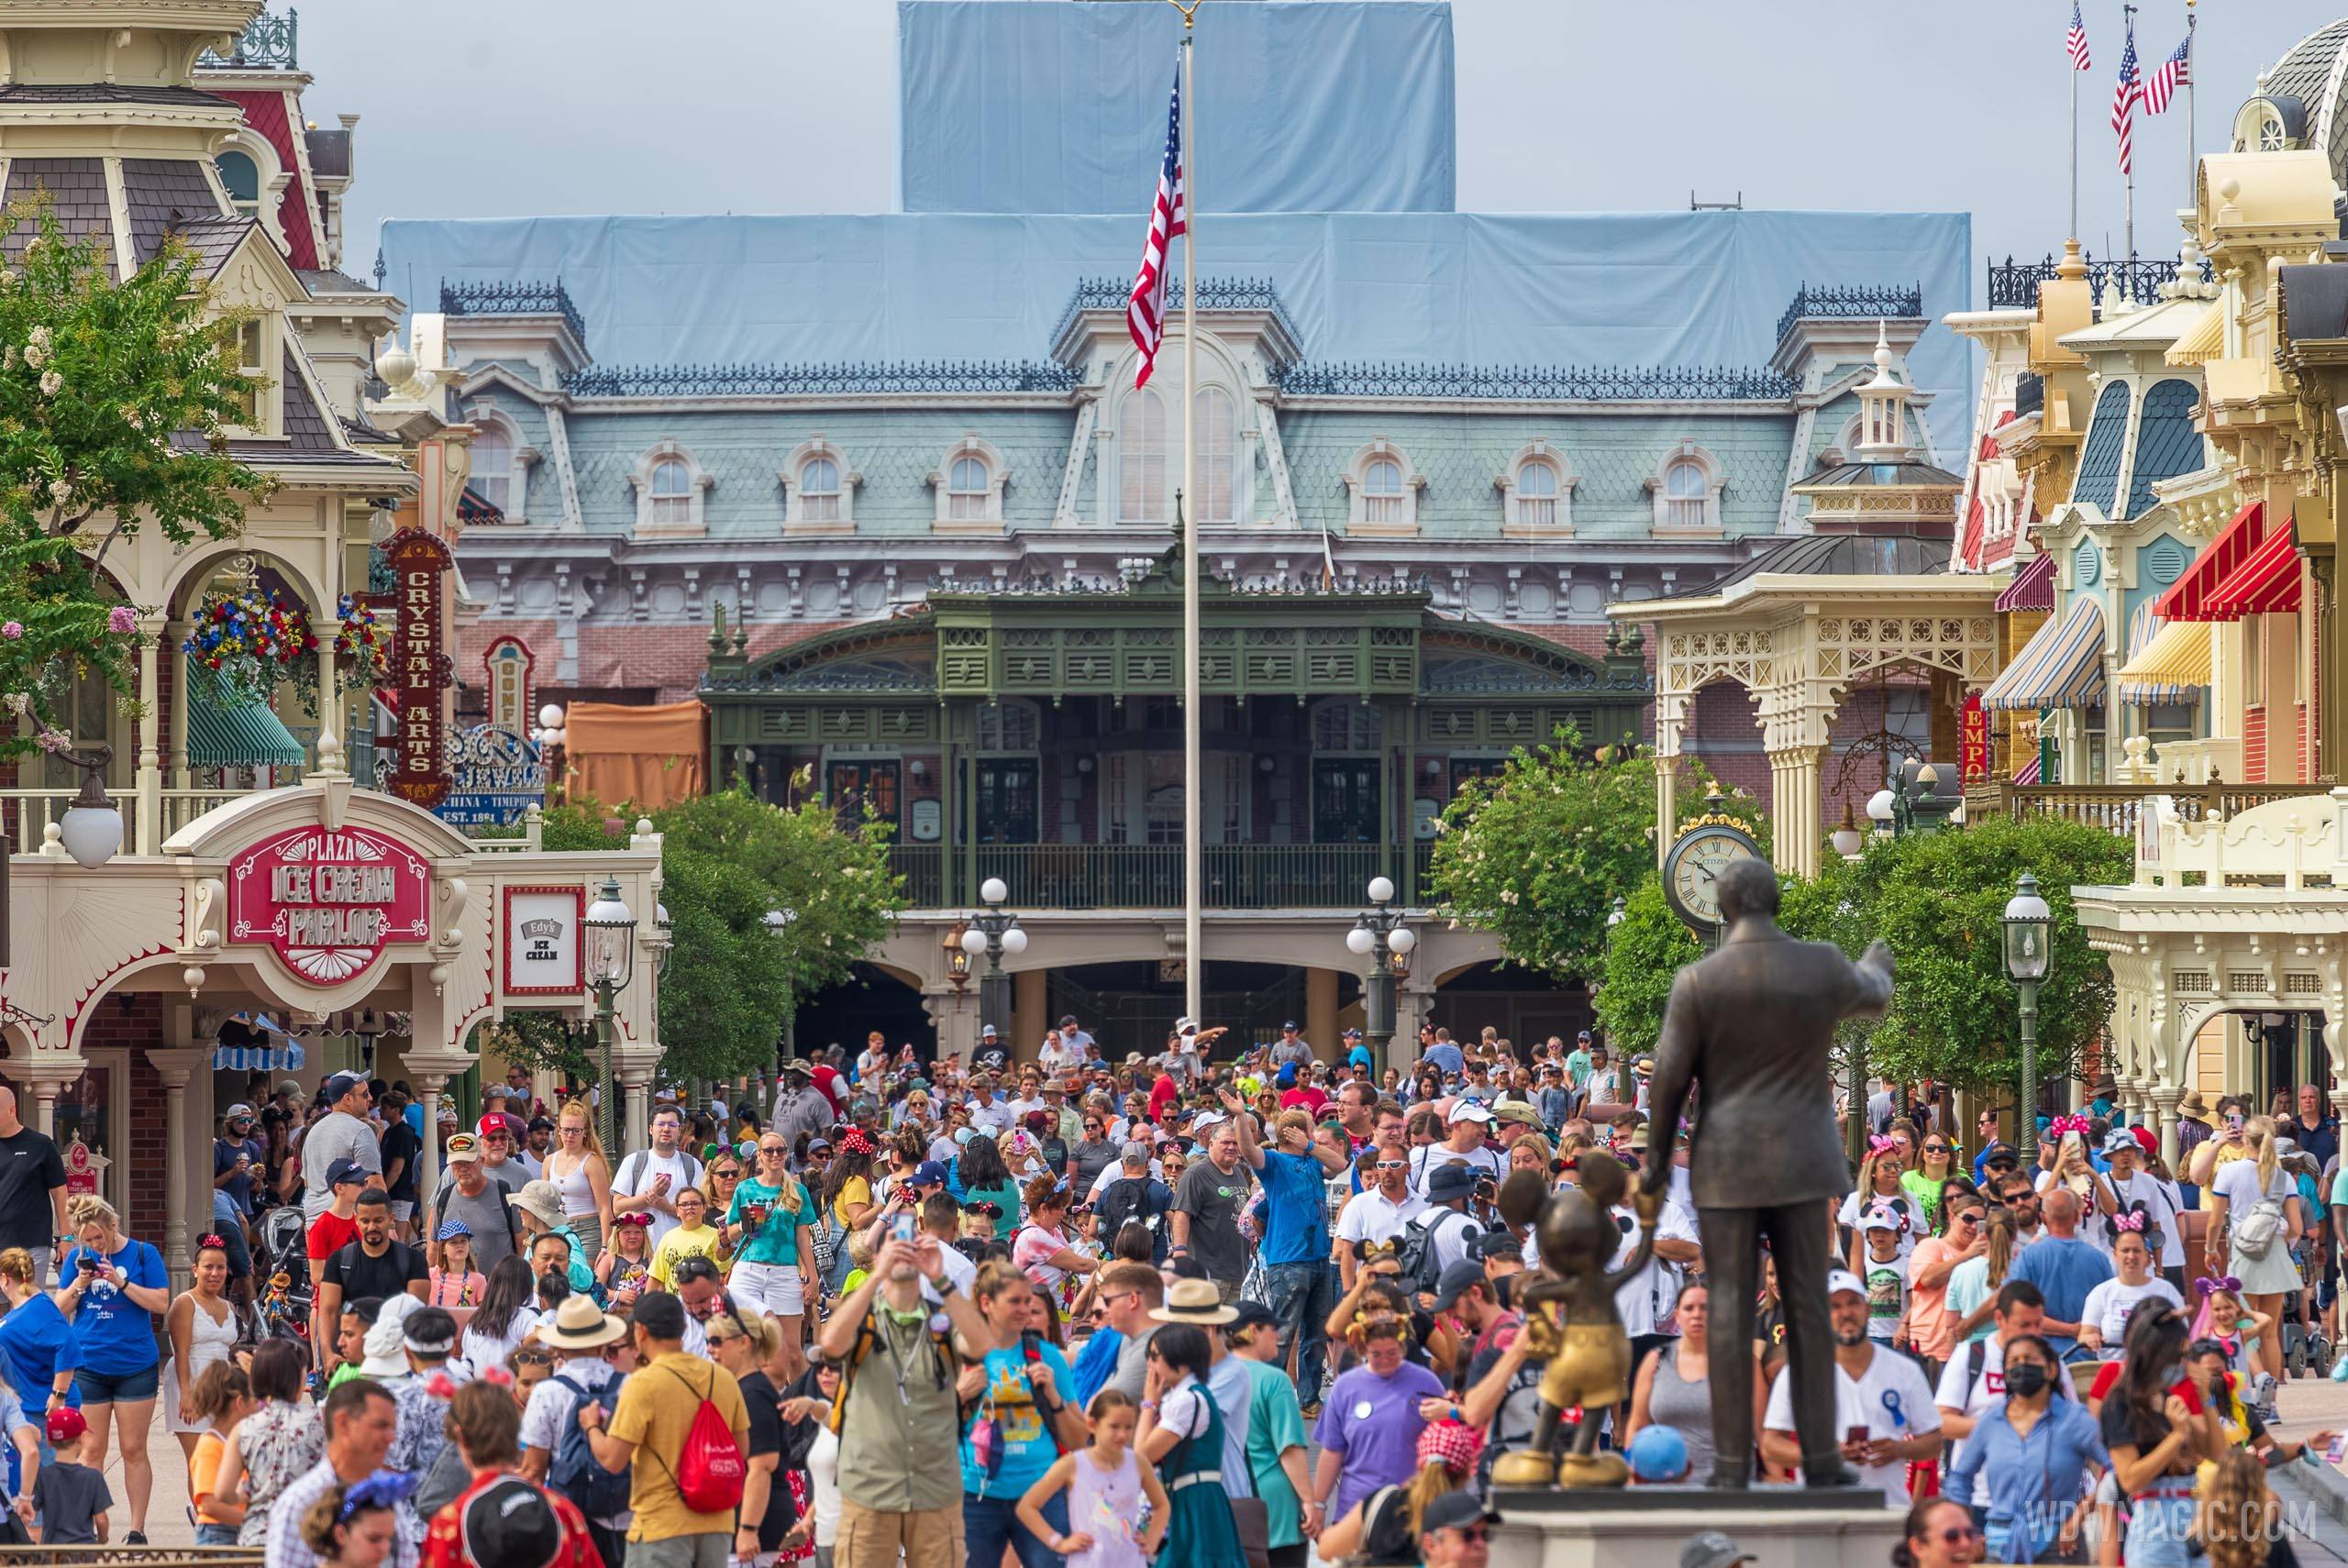 Disney removes mask requirements, barriers and physical distancing at Walt Disney World